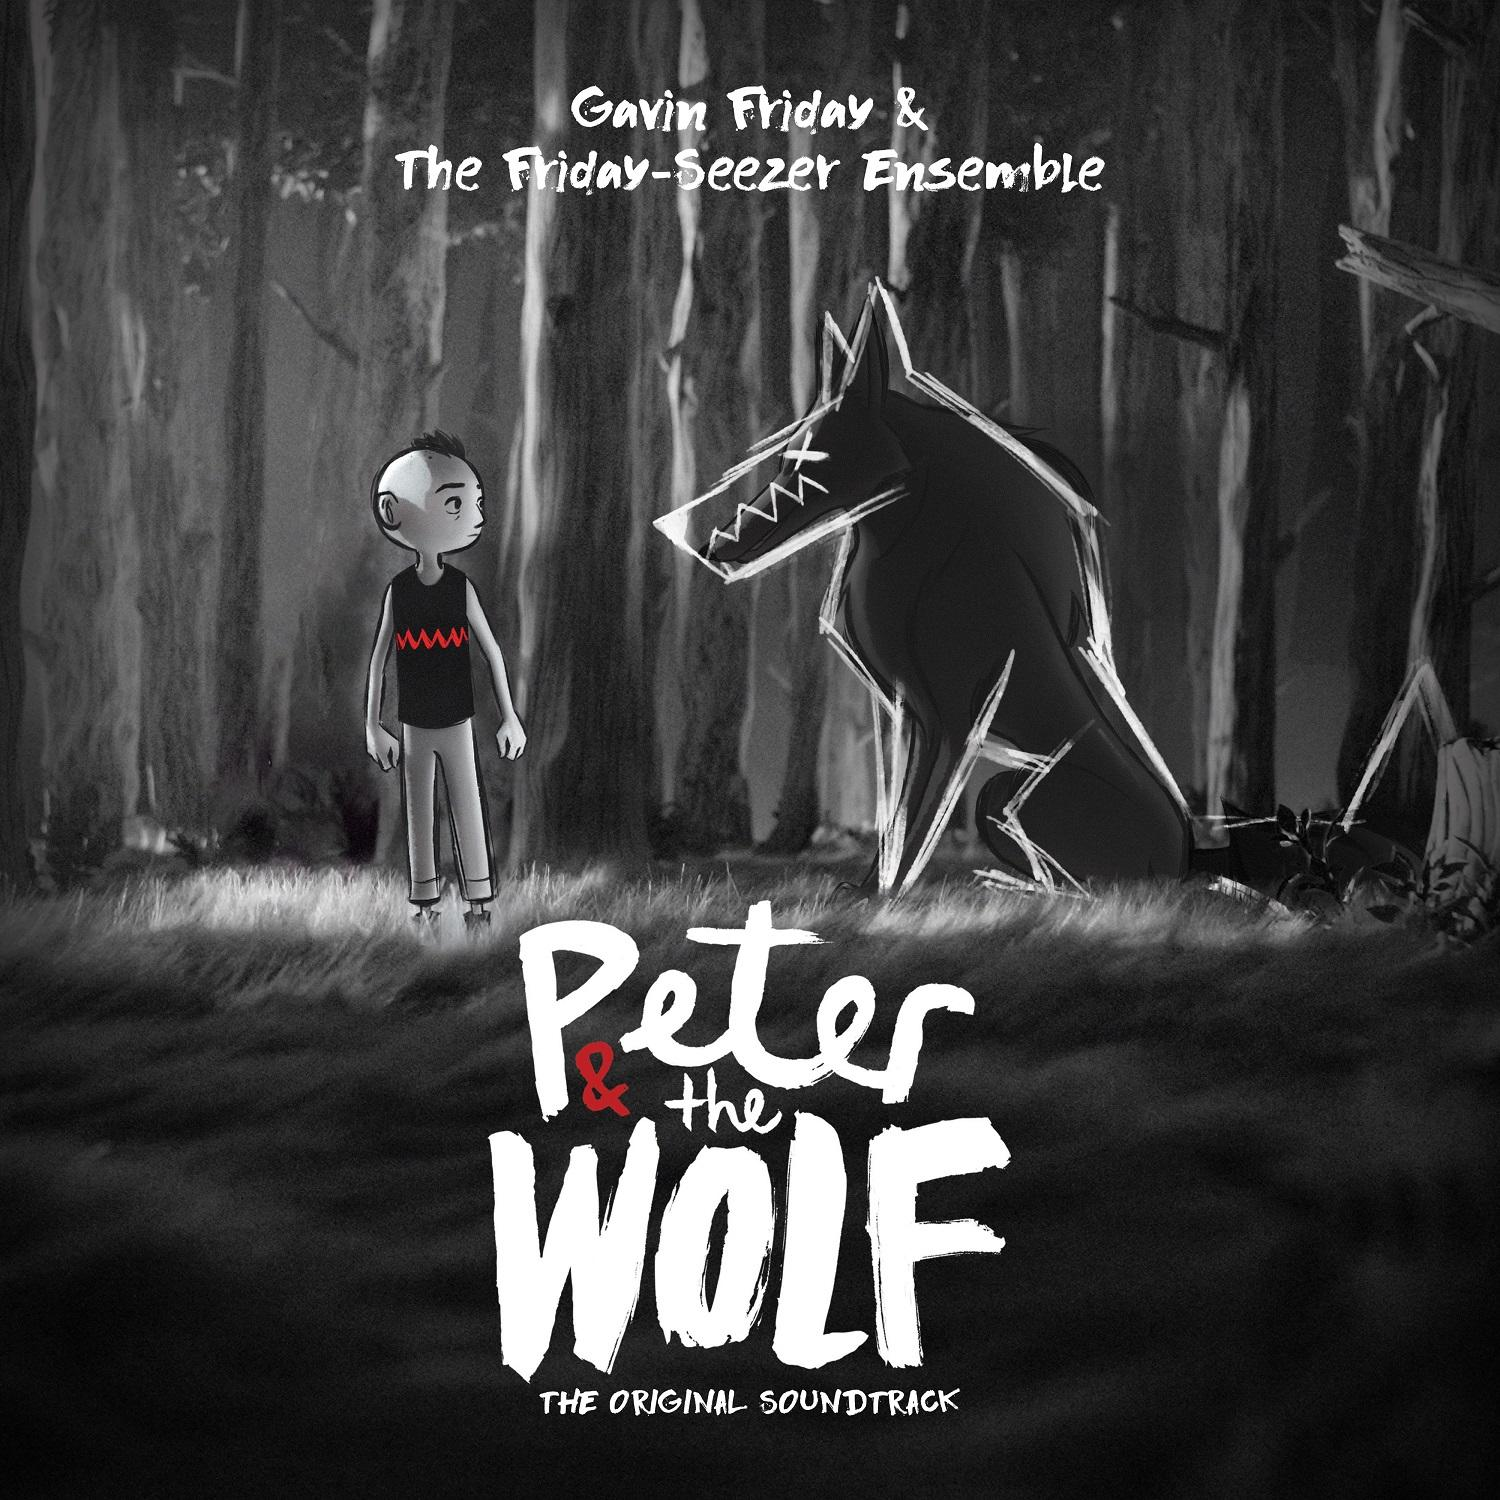 The Friday-Seezer Ensemble - Peter (CD) the - Wolf and